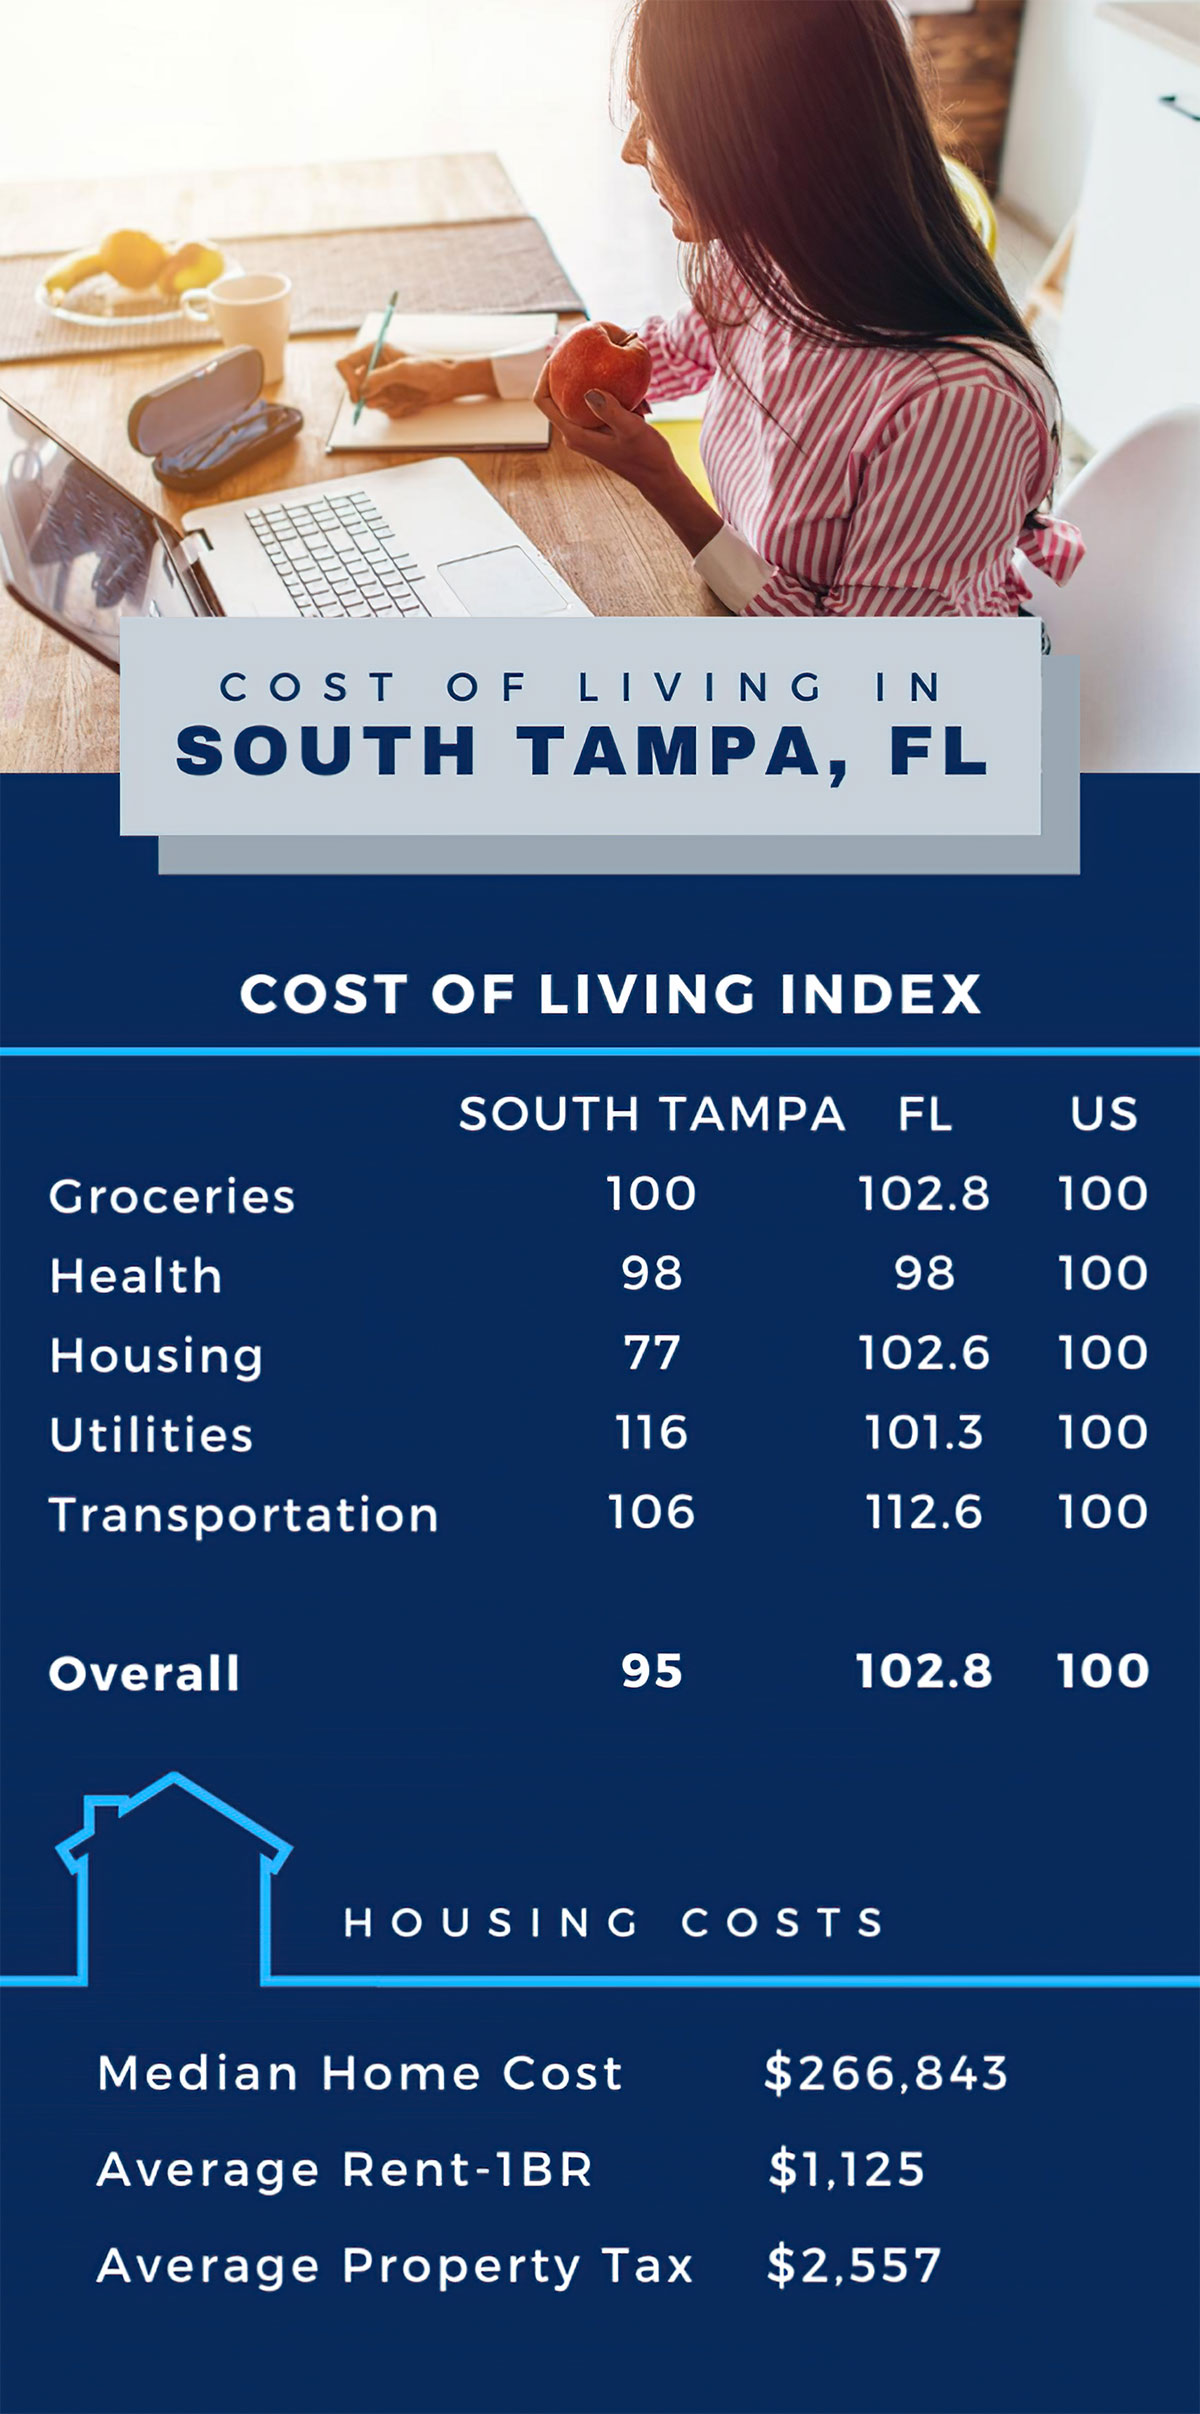 Cost of Living in South Tampa, FL infographic